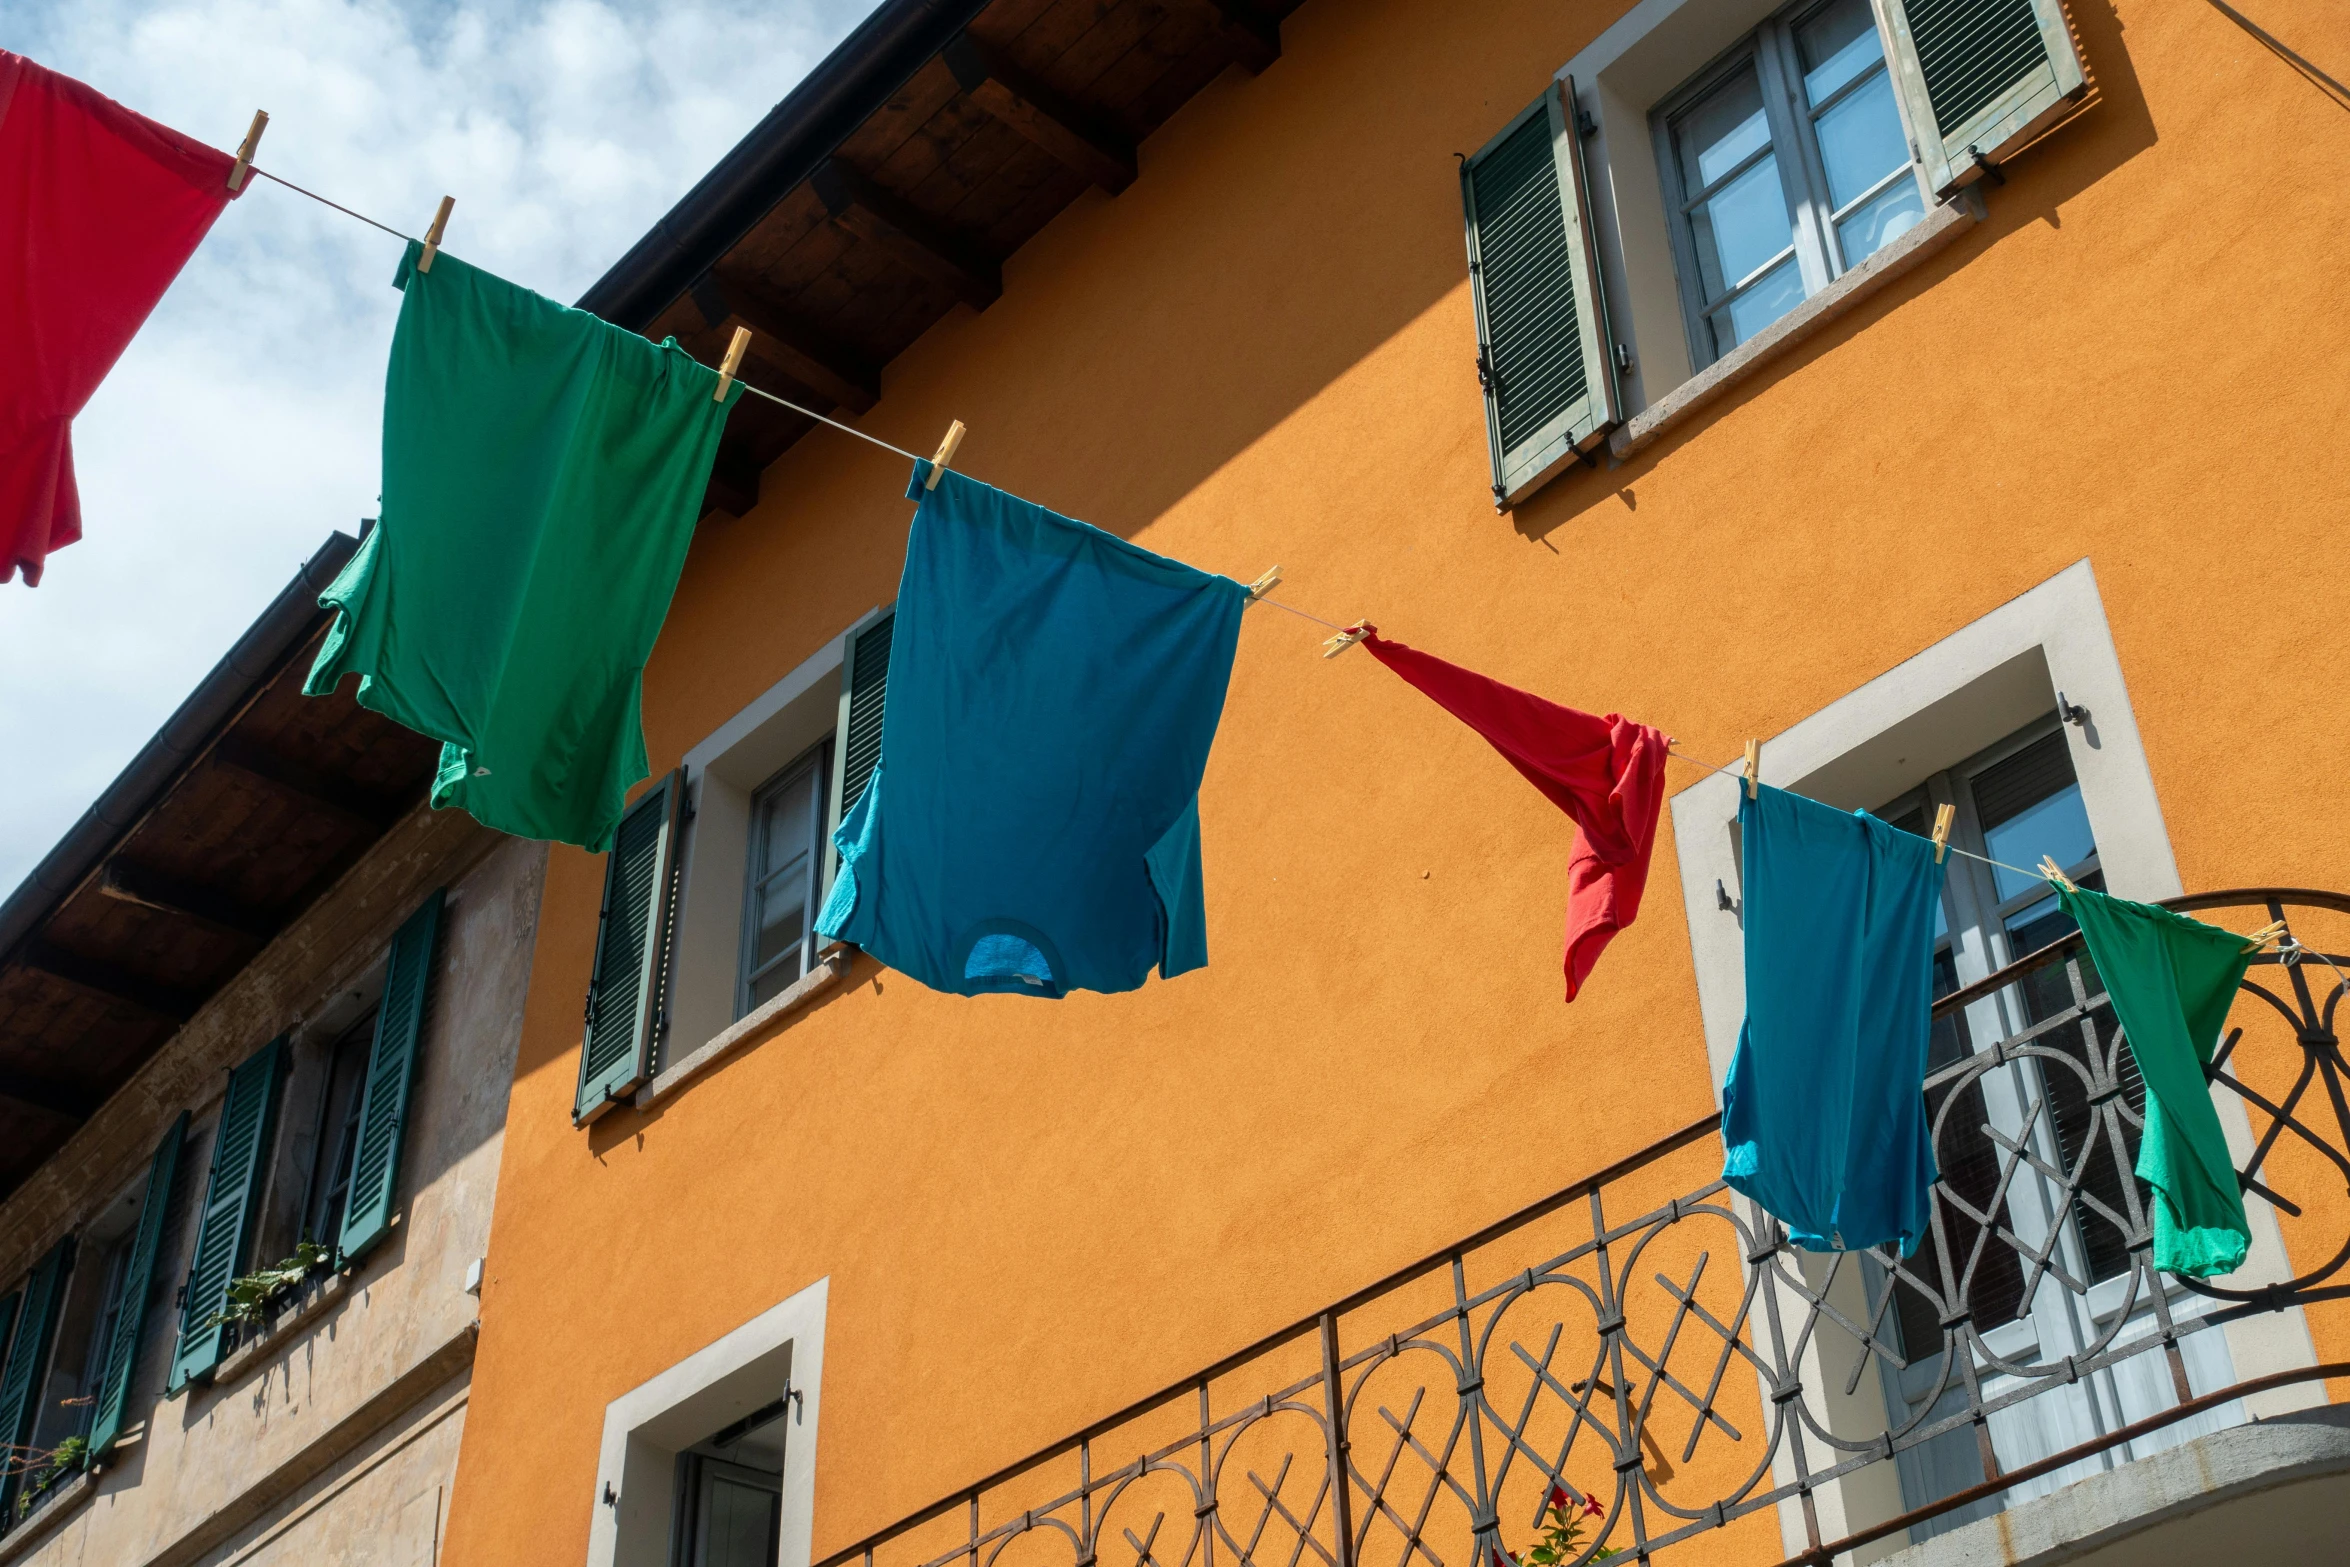 clothes hanging on a clothes line in front of a building, inspired by Michelangelo Buonarotti, pexels contest winner, arte povera, chartreuse and orange and cyan, french village exterior, red pennants, youtube thumbnail